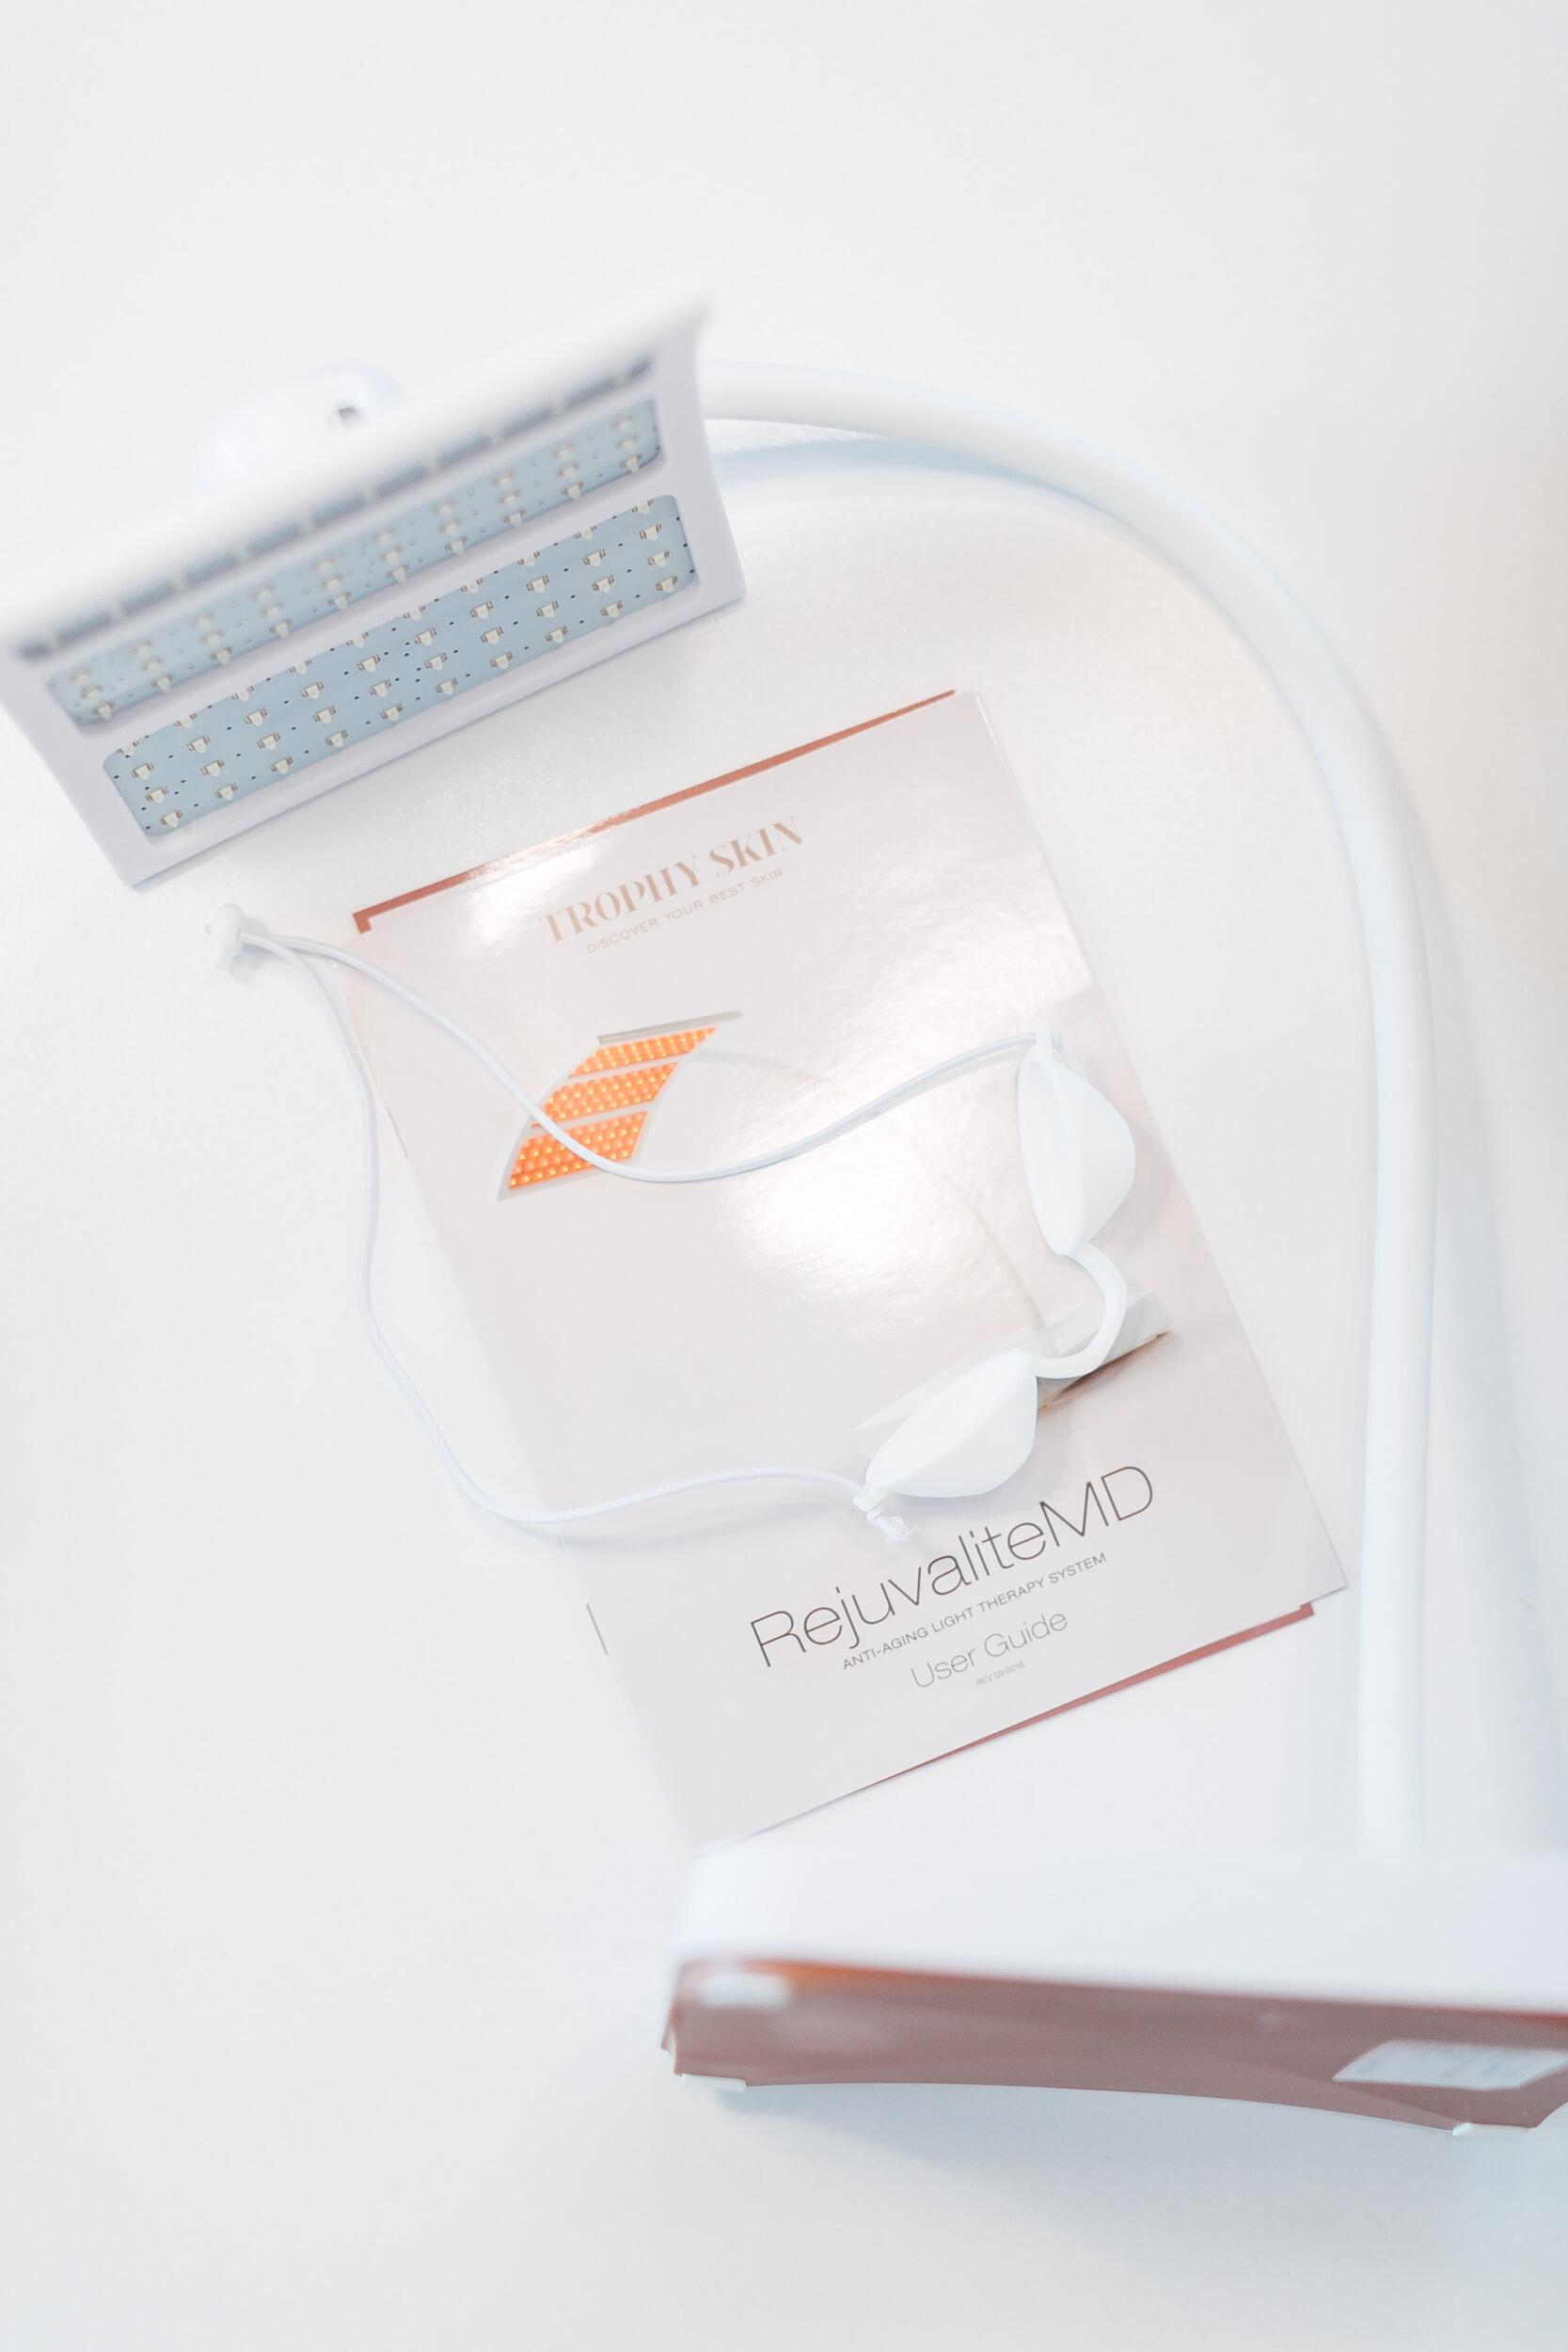 Everything You Want to Know about the Led Light Therapy Mask by East Memphis style blogger Walking in Memphis in High Heels